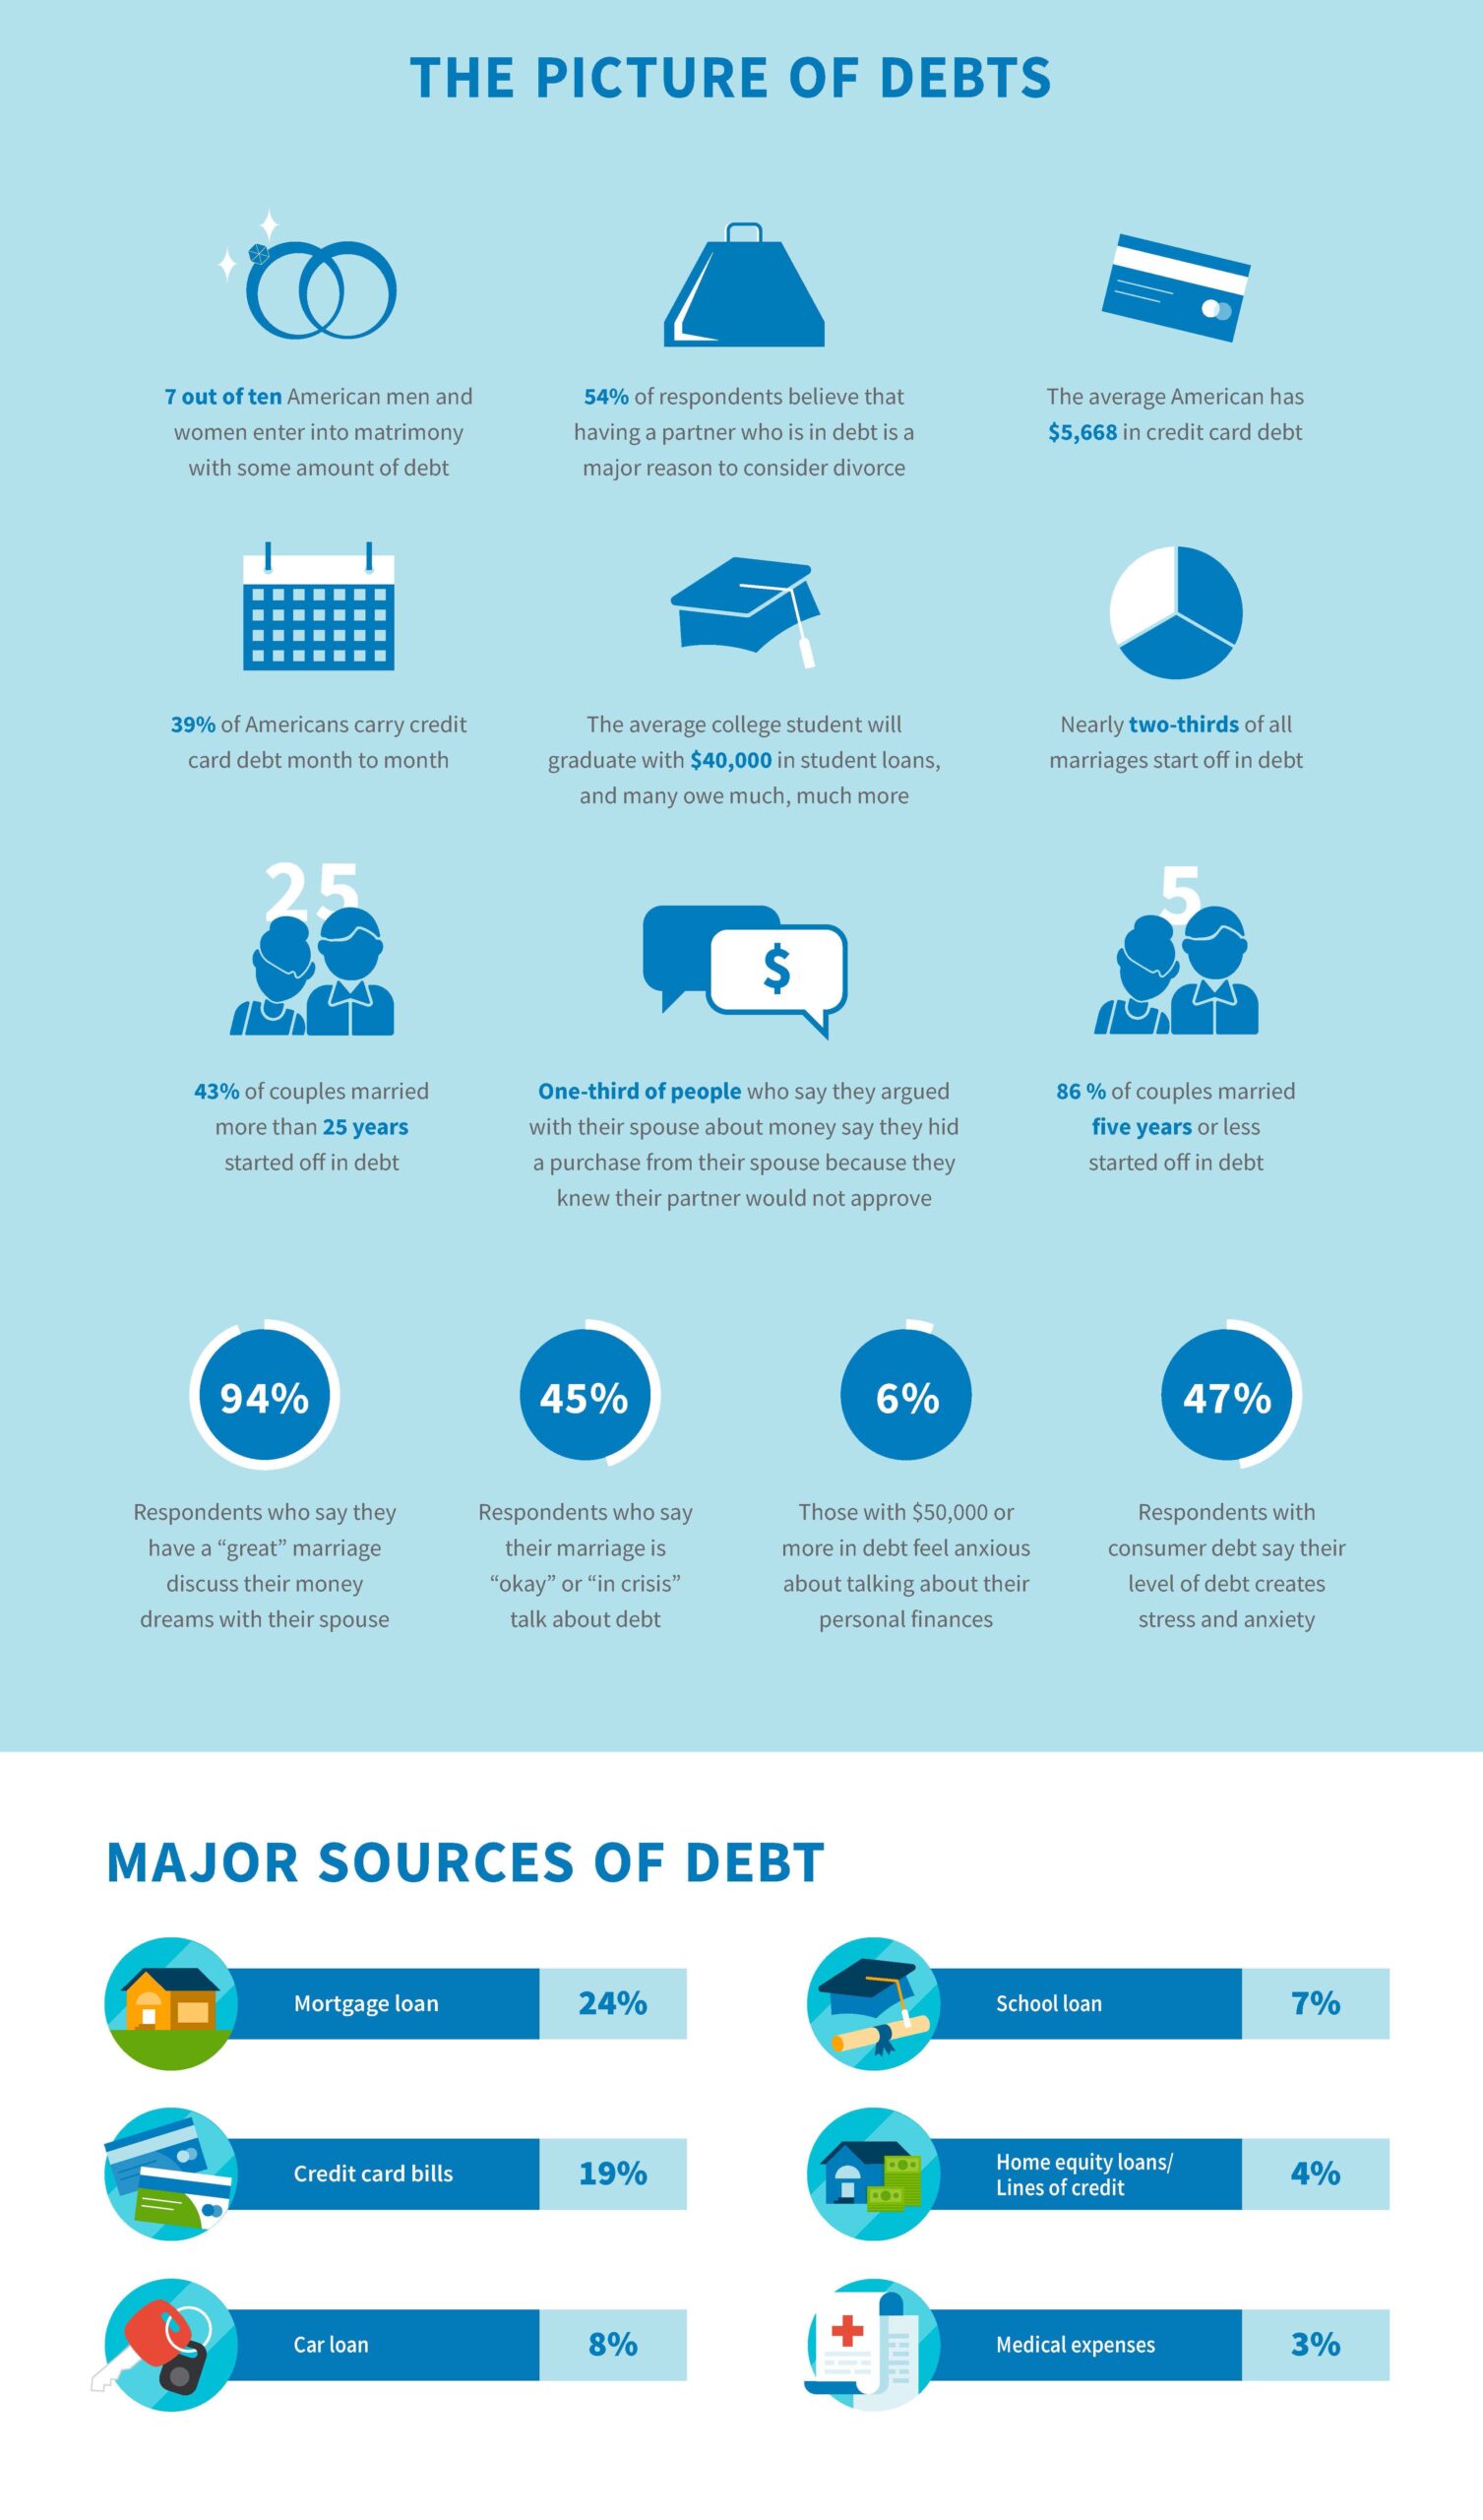 The picture of debt and major sources of debt